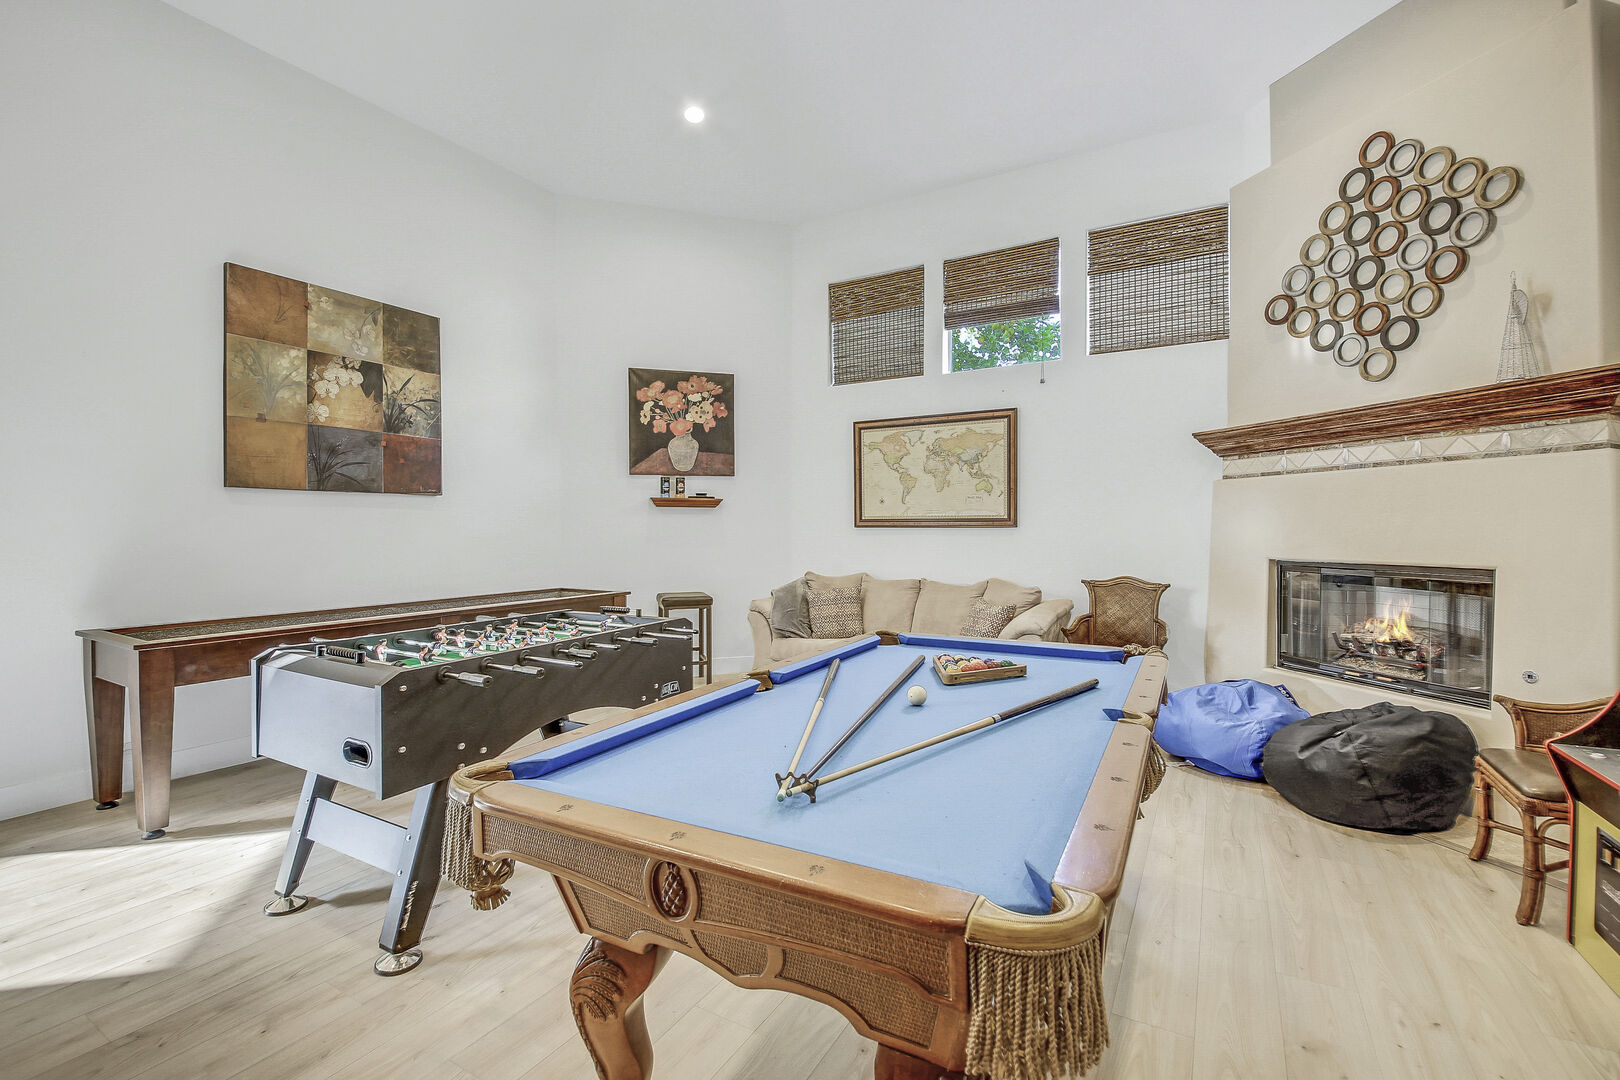 Watch or participate in numerous games such as a round of Billiards, Shuffleboard or Table Soccer.